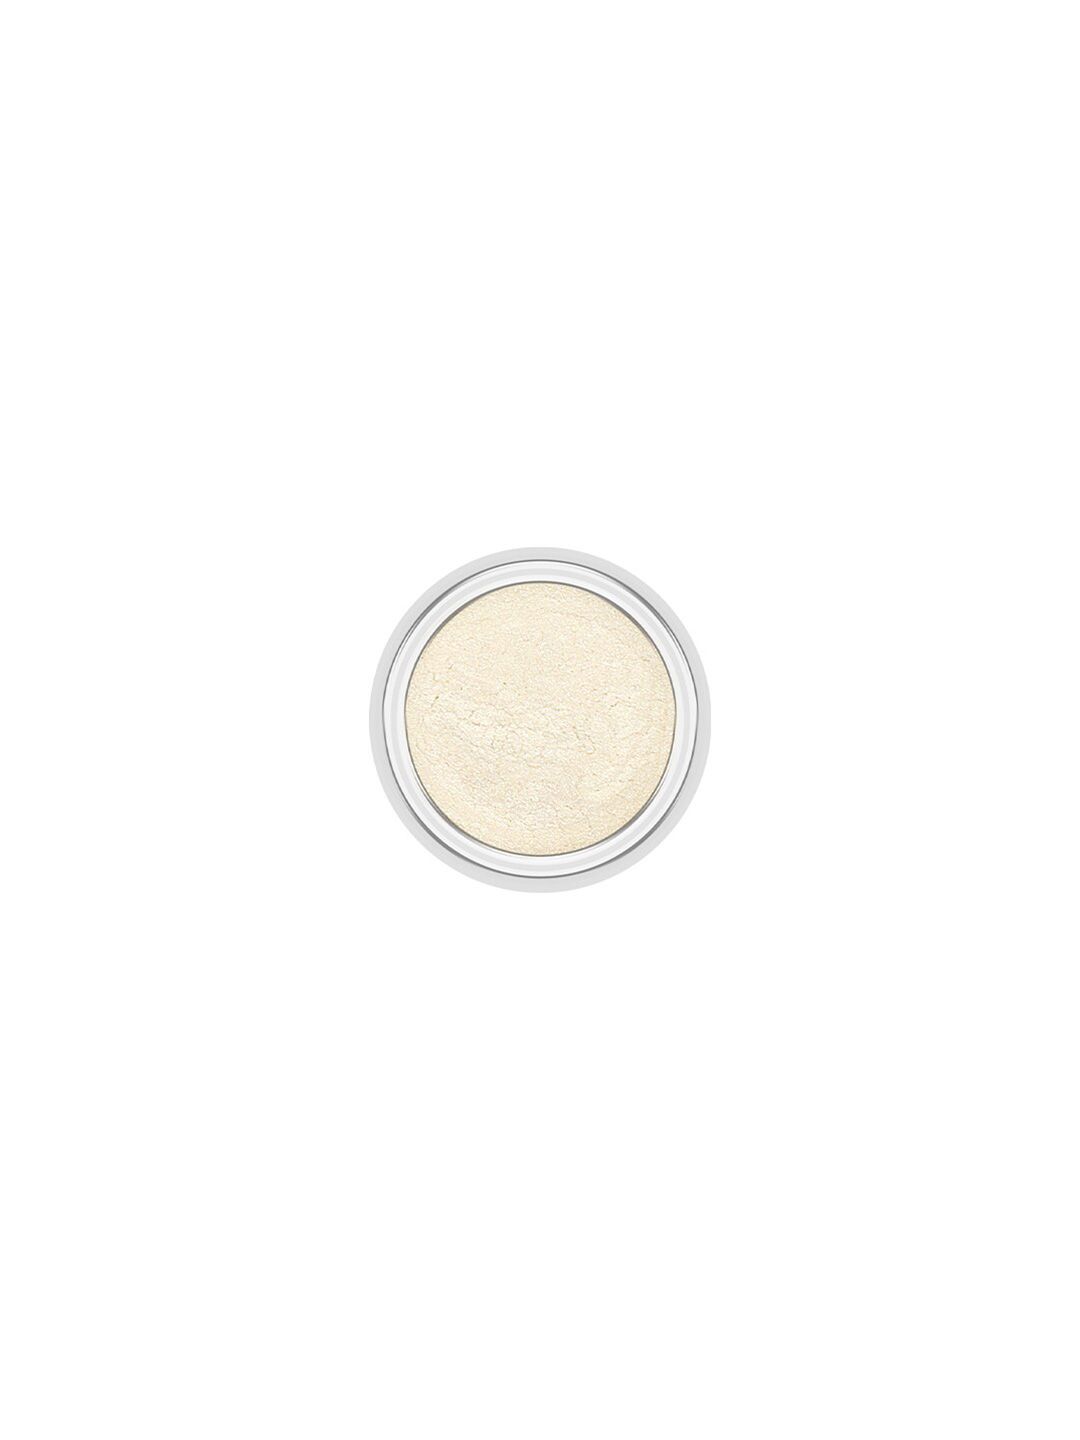 C2P PROFESSIONAL MAKEUP HD Loose Precious Pigments Eyeshadow - Sunday Ice 05 Price in India